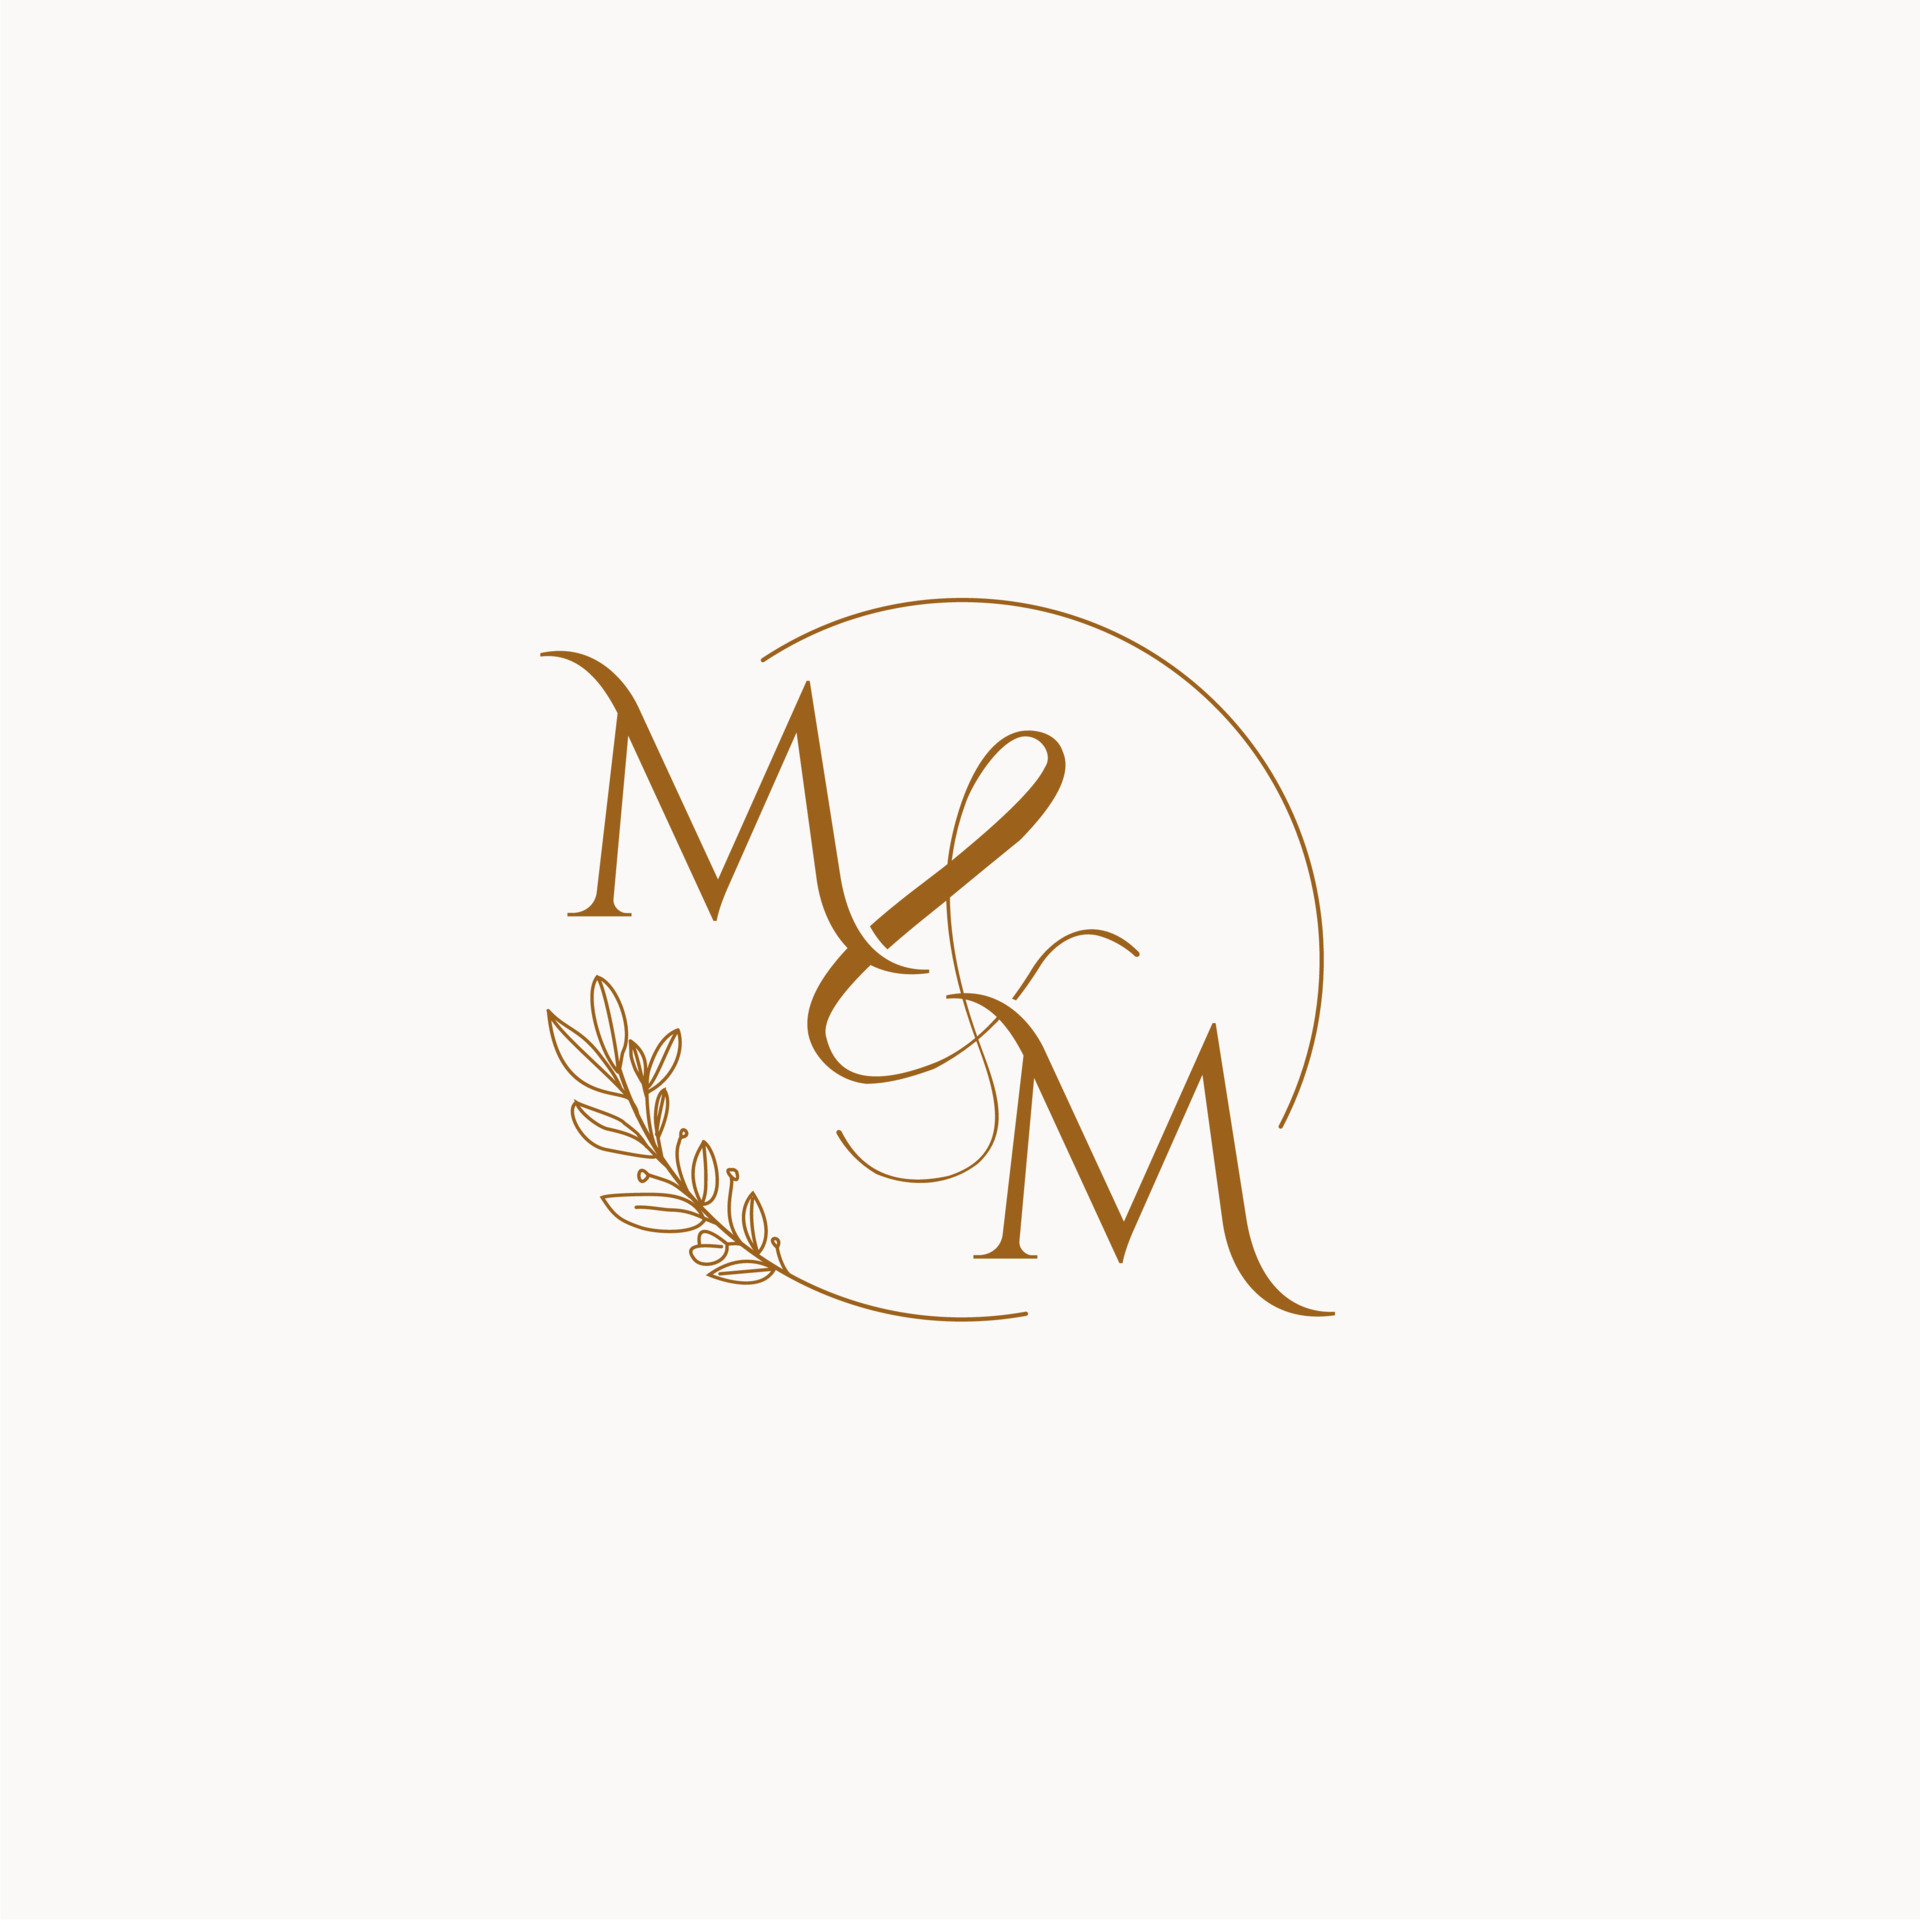 Initial MM letters Decorative luxury wedding logo - stock vector 3144776